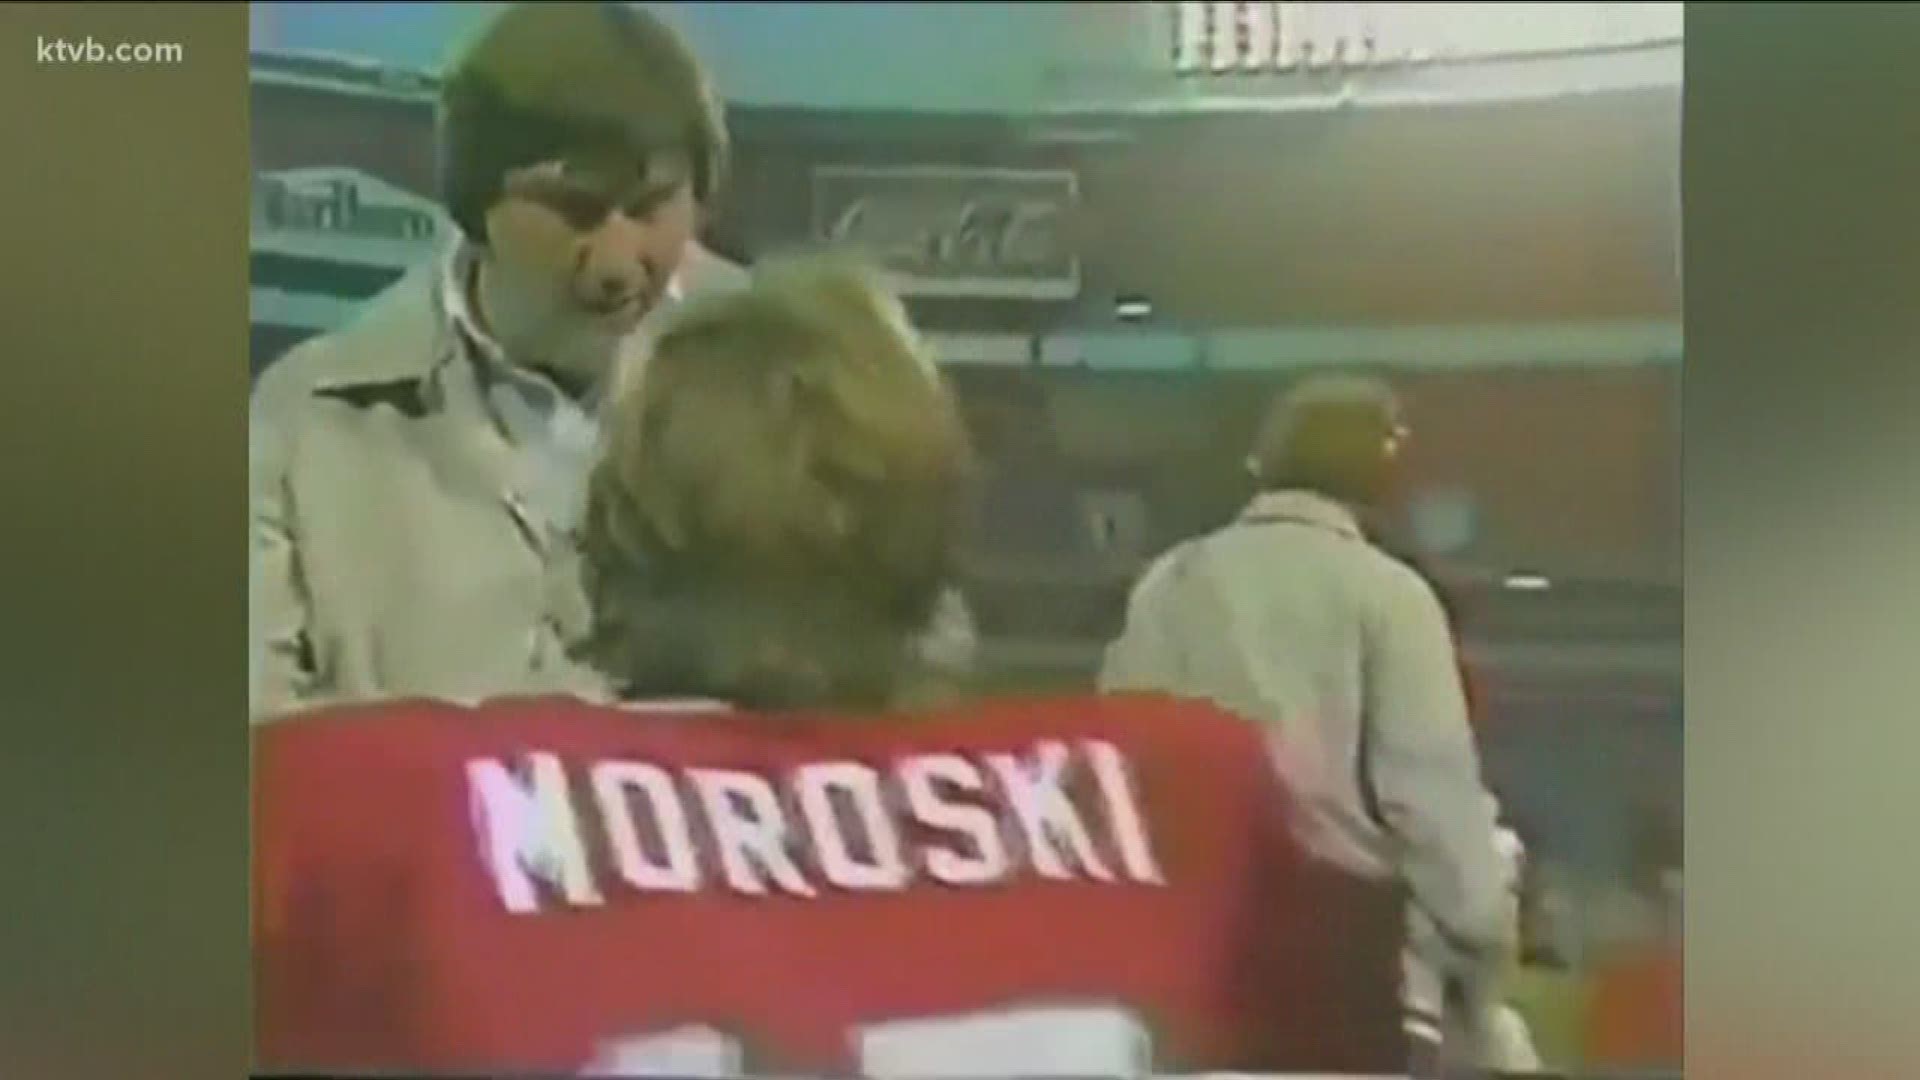 Yotes head coach Mike Moroski hold the NFL record for largest comeback win in the first start by a quarterback, which Giants' rookie Daniel Jones couldn't break.